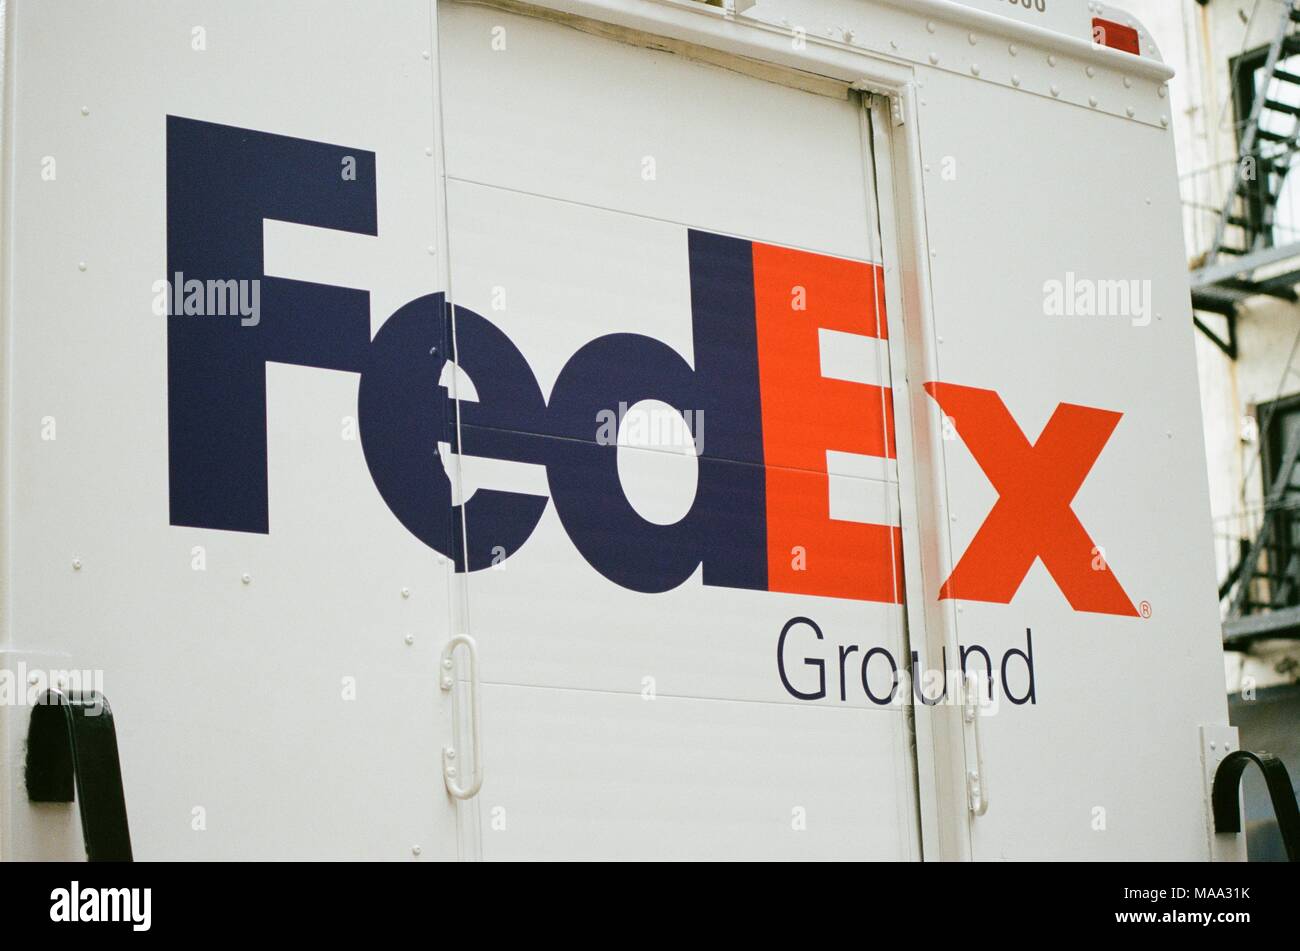 Close-up of logo on the back of a Federal Express (FedEx) Ground delivery truck in Manhattan, New York City, New York, September 15, 2017. () Stock Photo